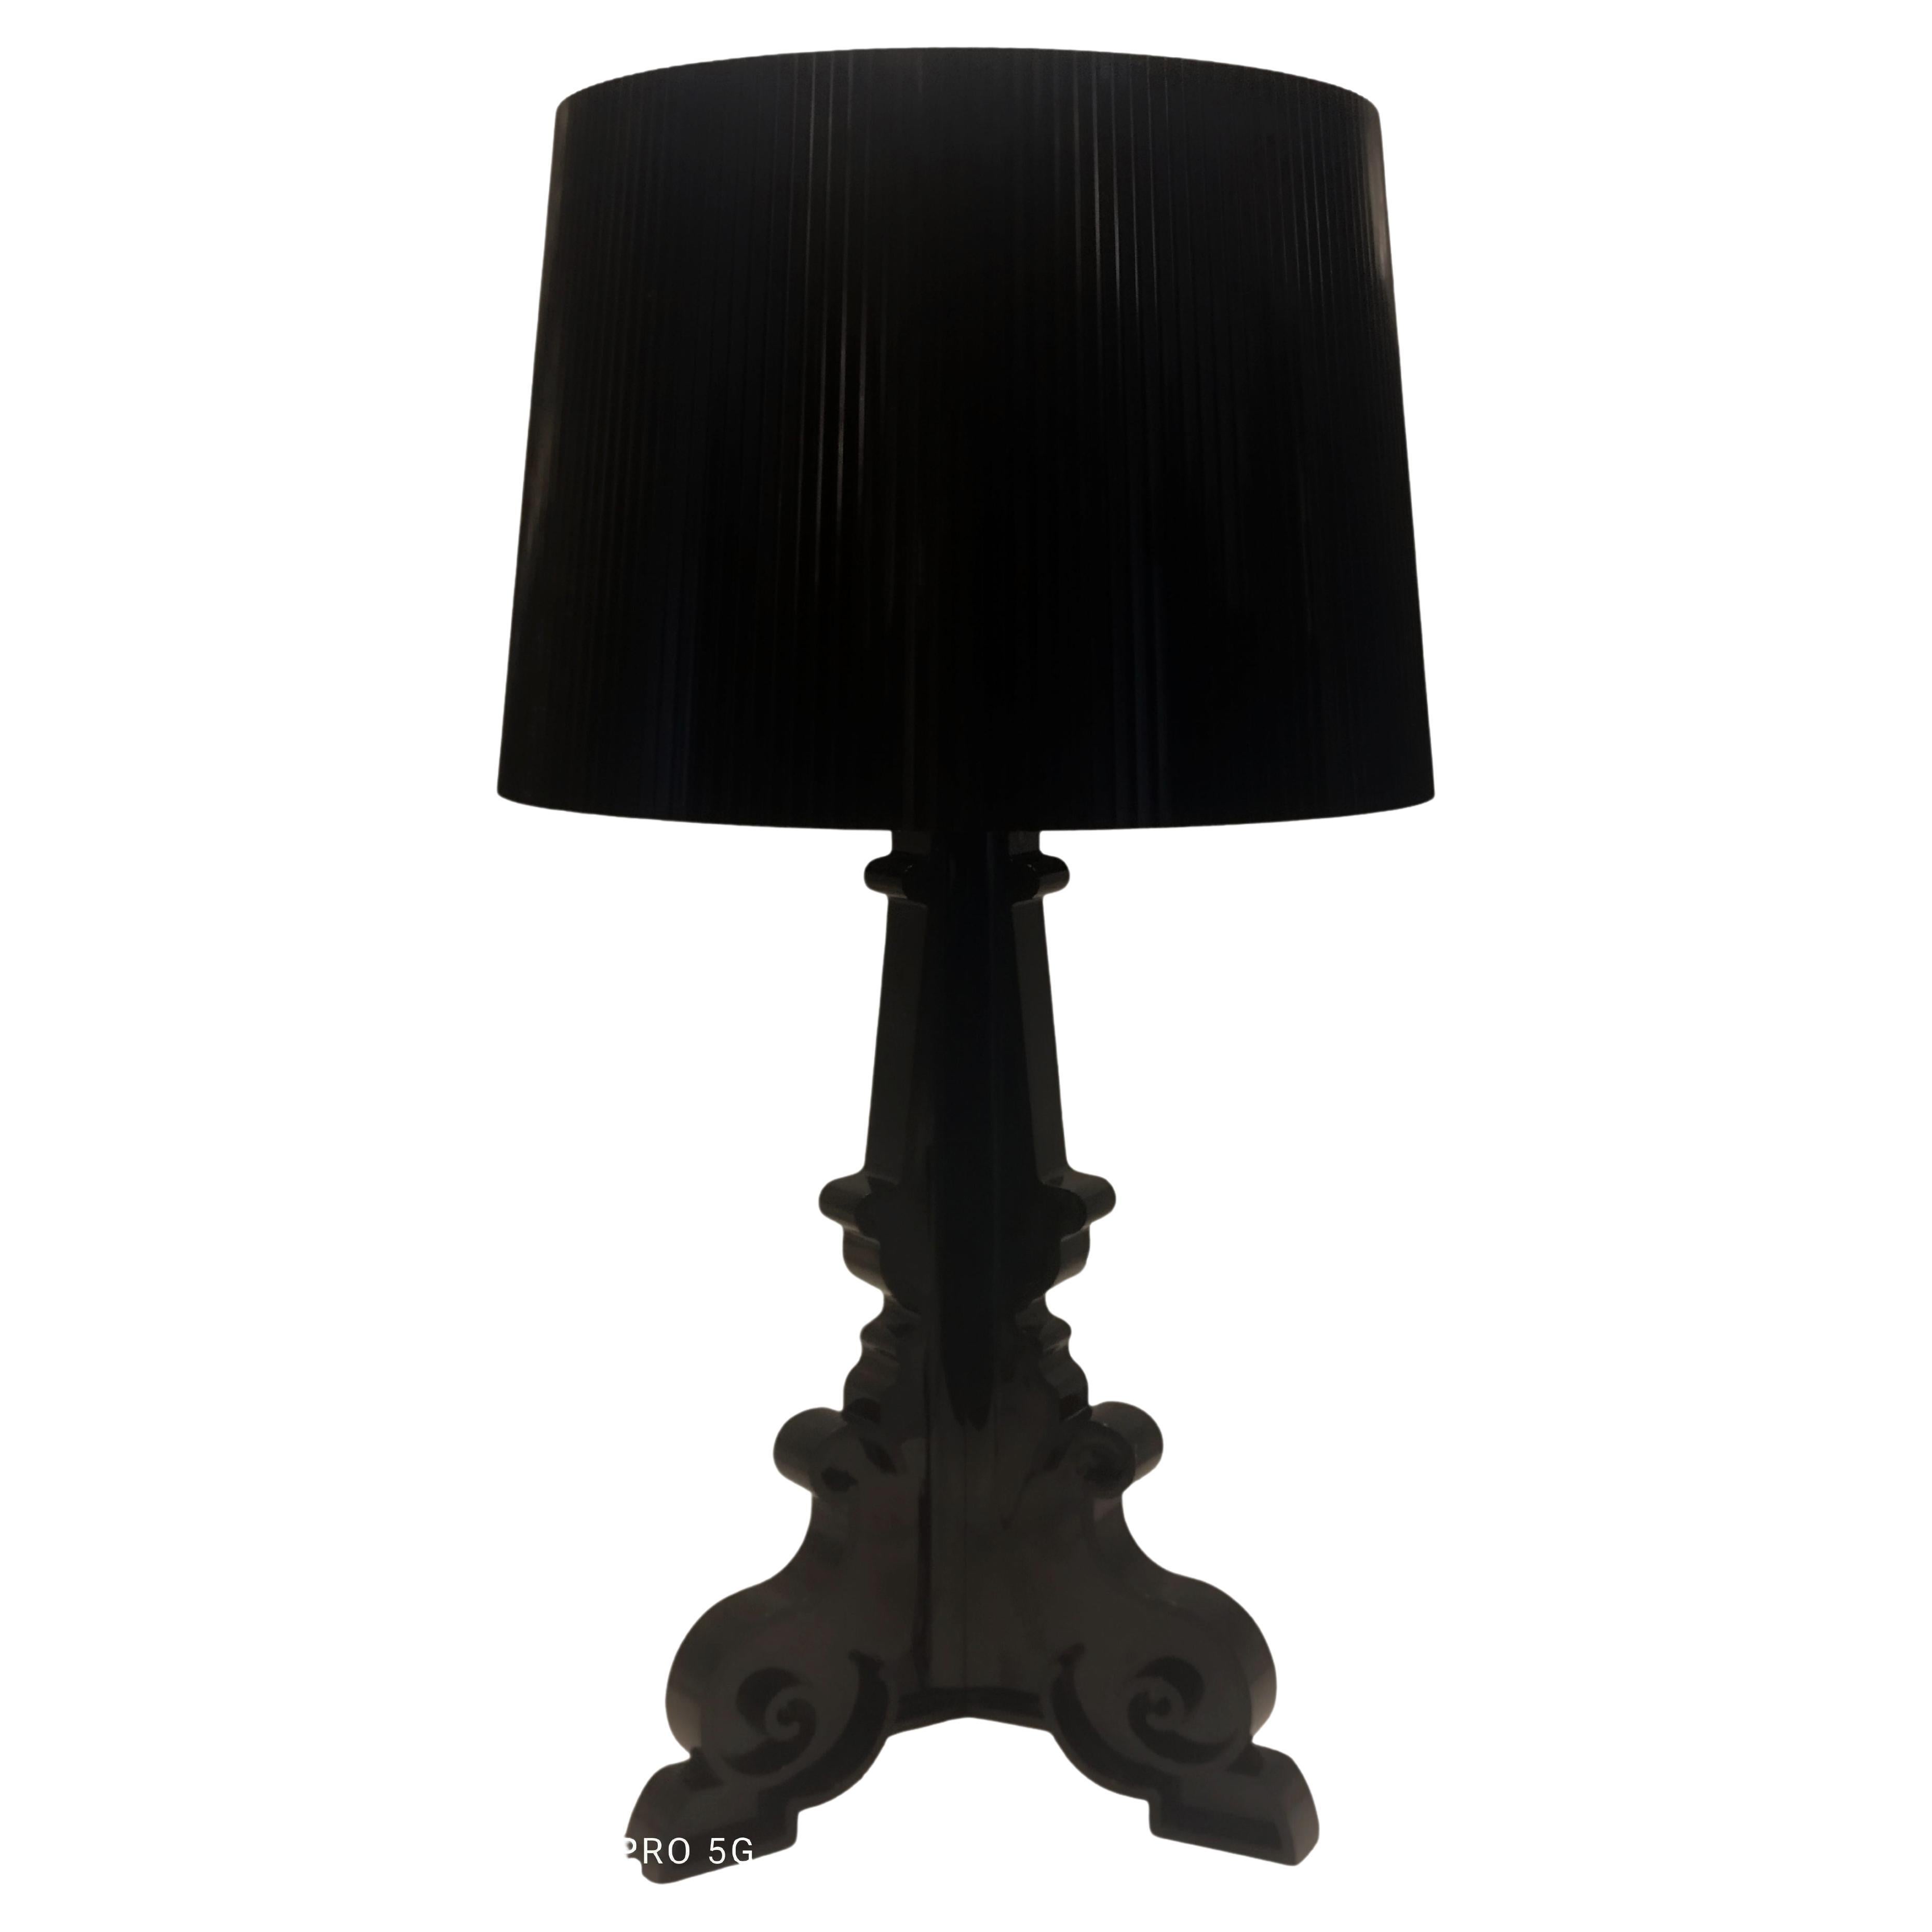 Ferruccio Laviani for Kartell Black "Bourgie" Table Lamp, Italy 2015 For Sale